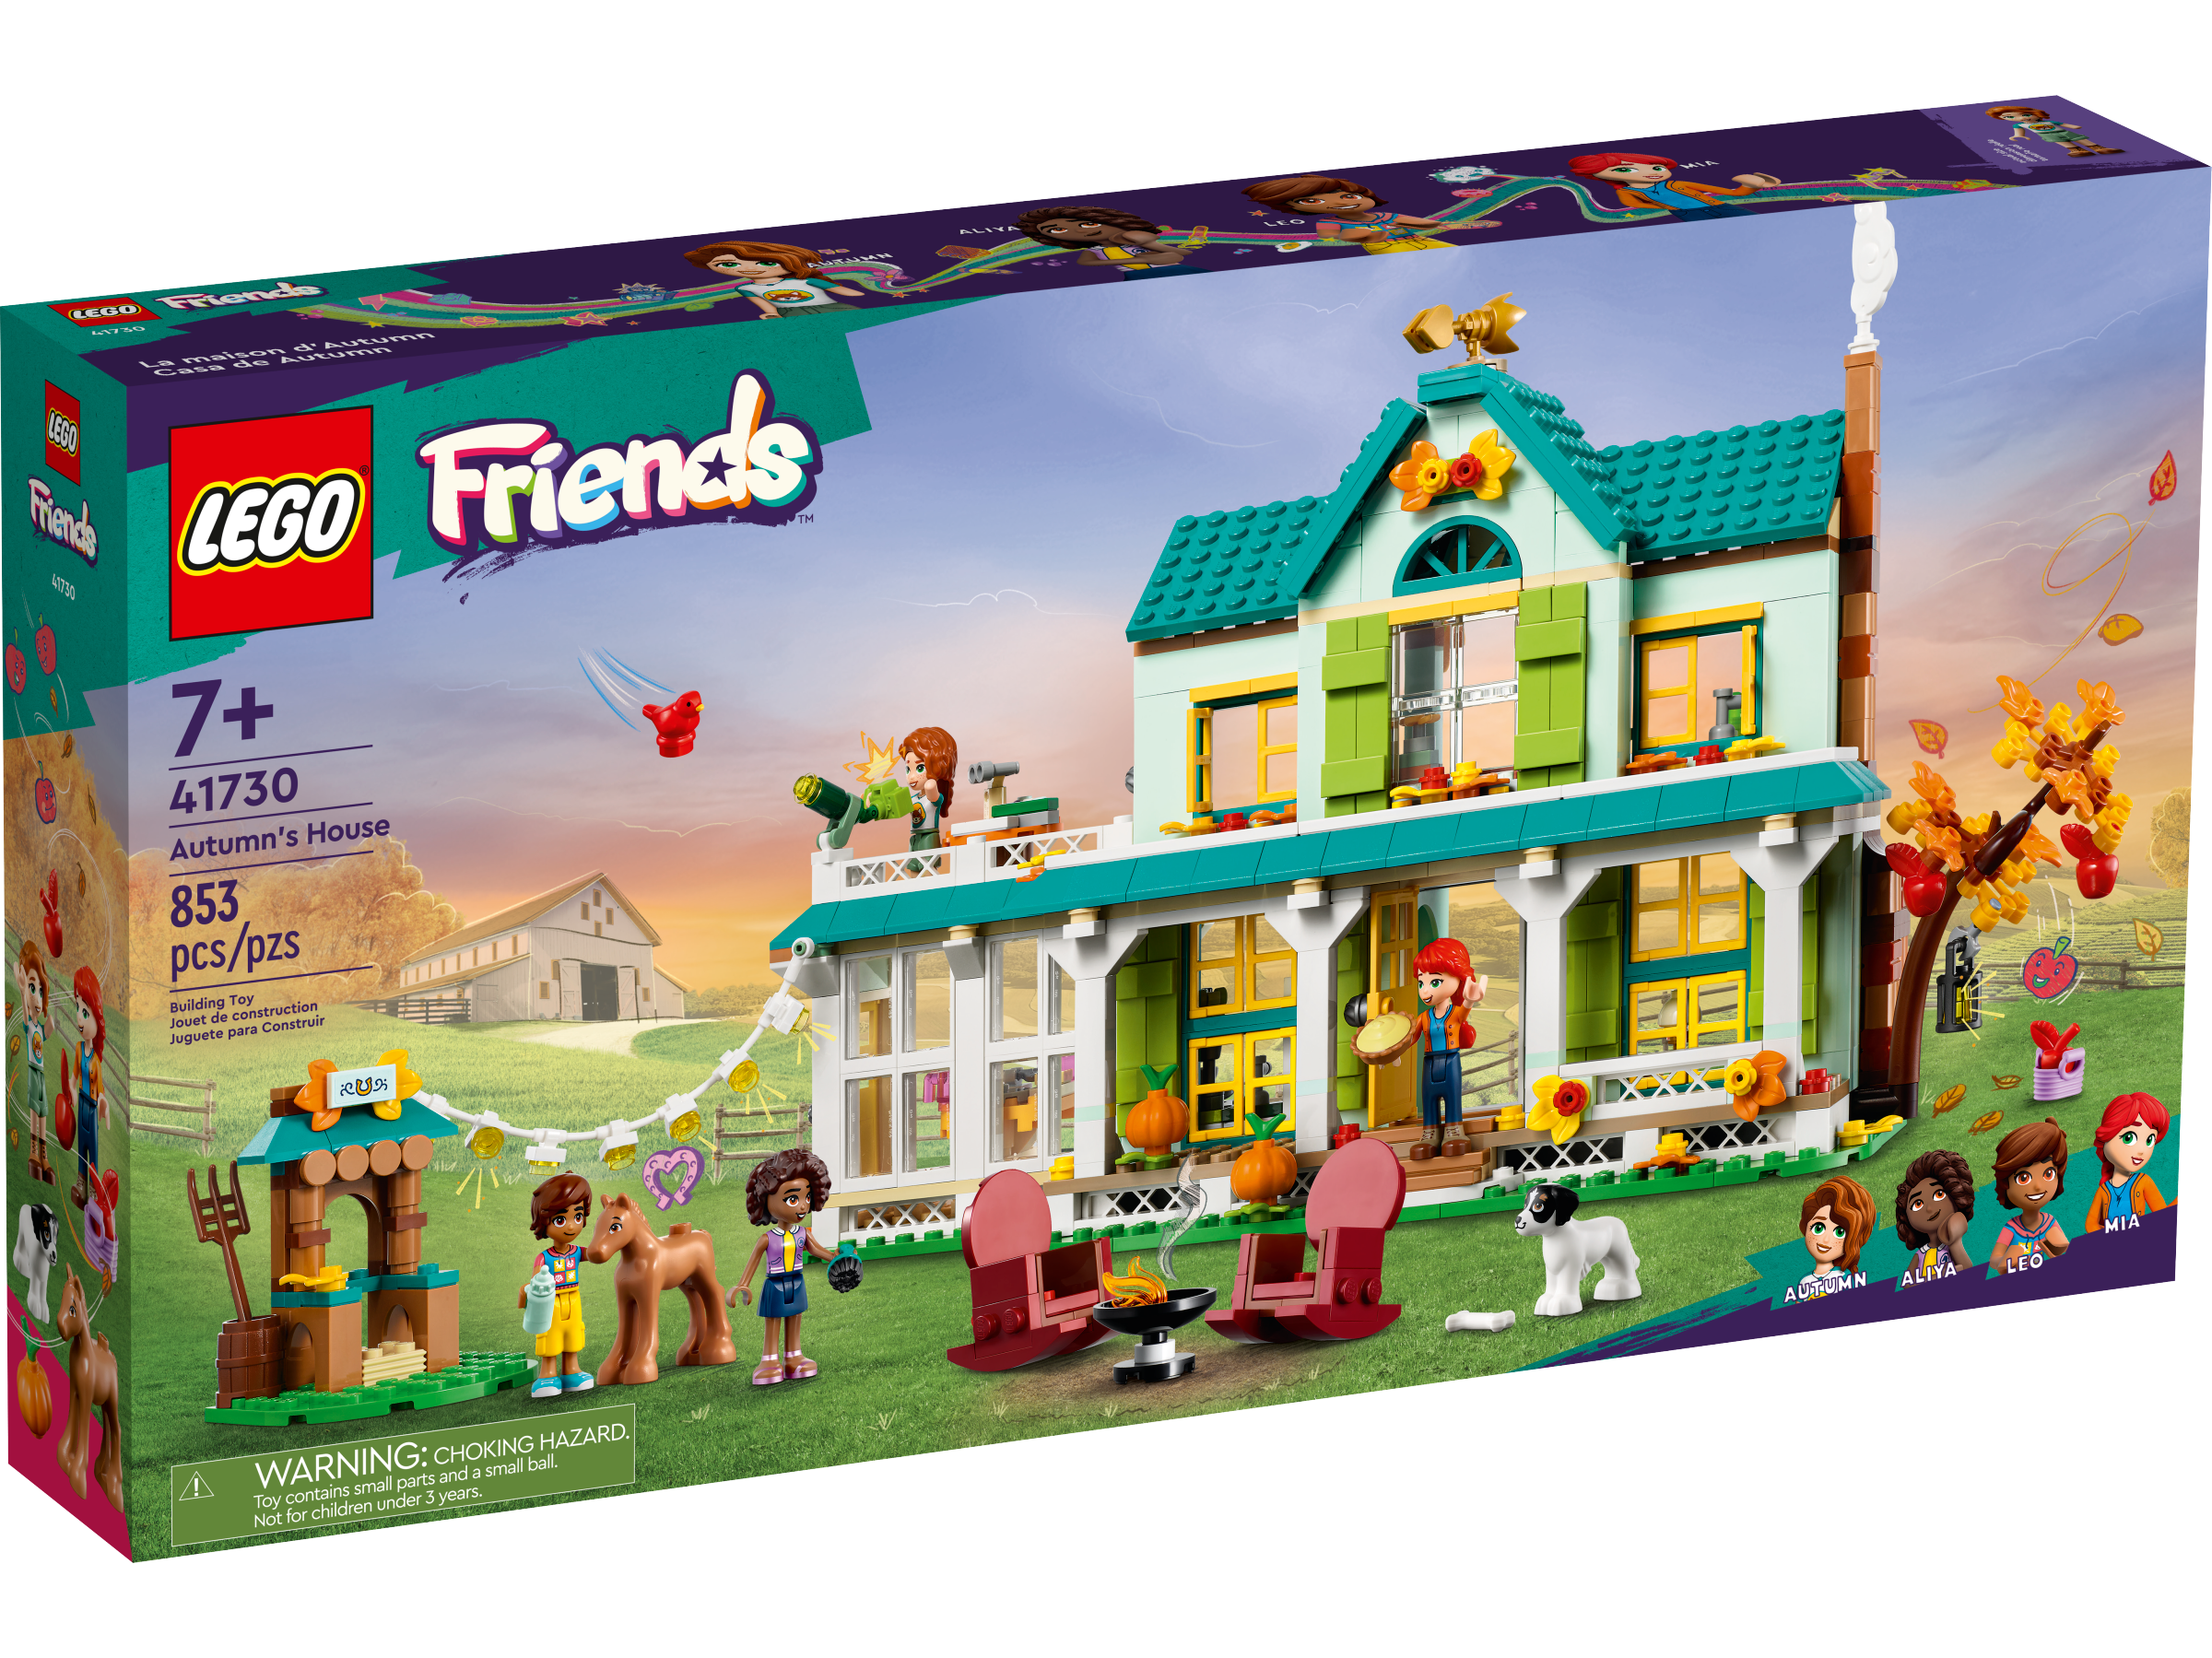 Autumn's House 41730 | Friends | Buy online at the Official LEGO